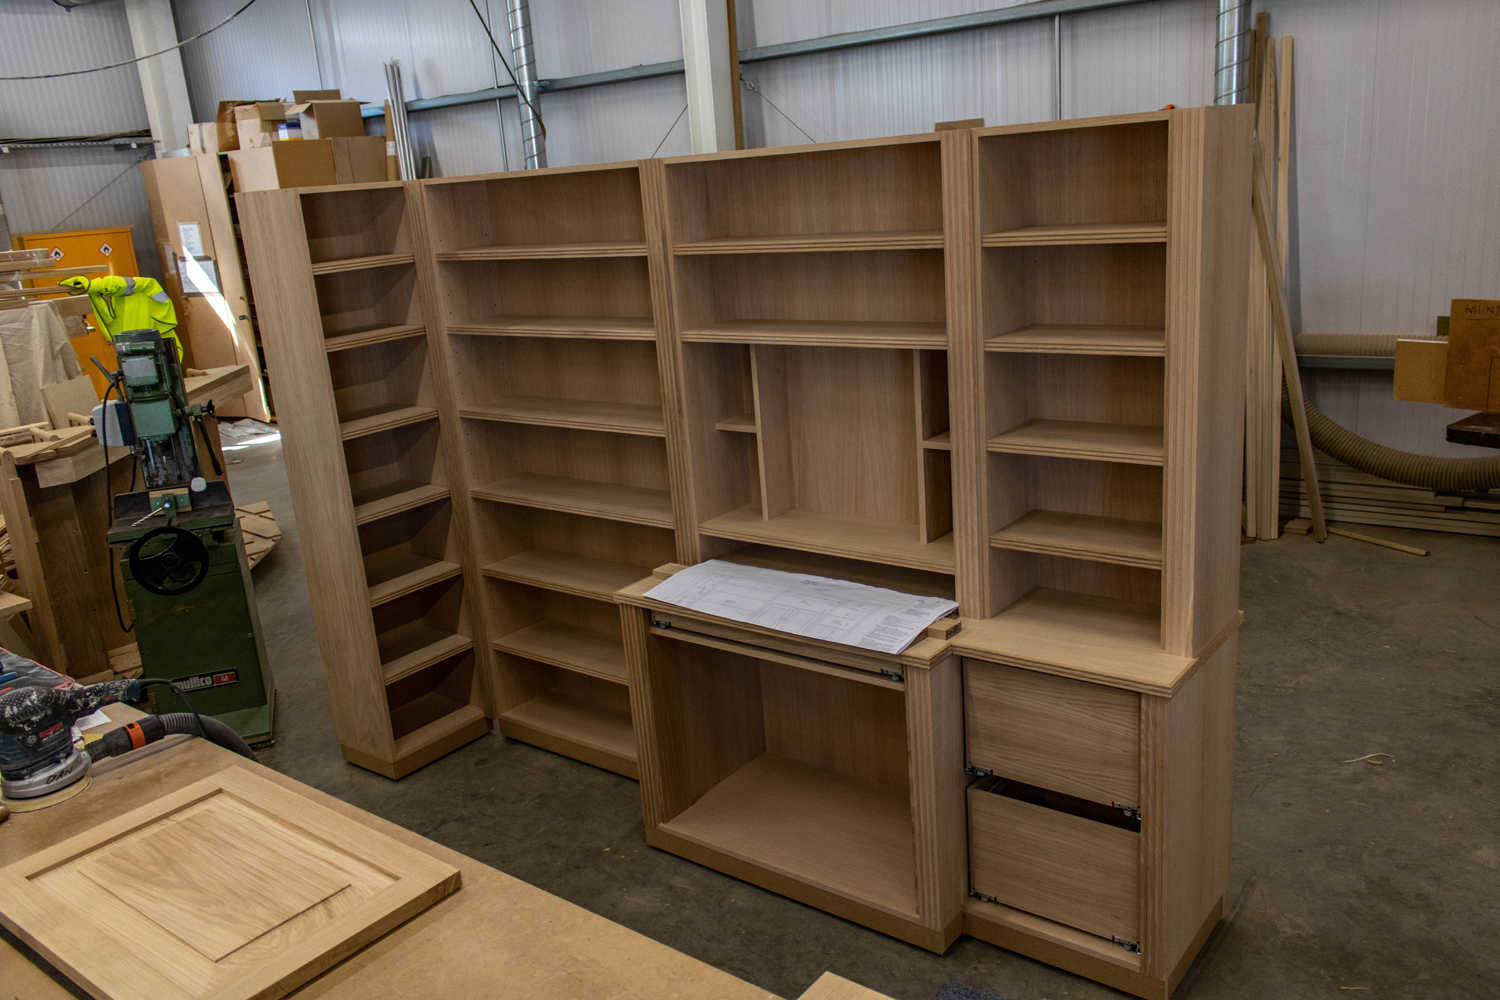 wooden set of shelves and cabinetry in workshop